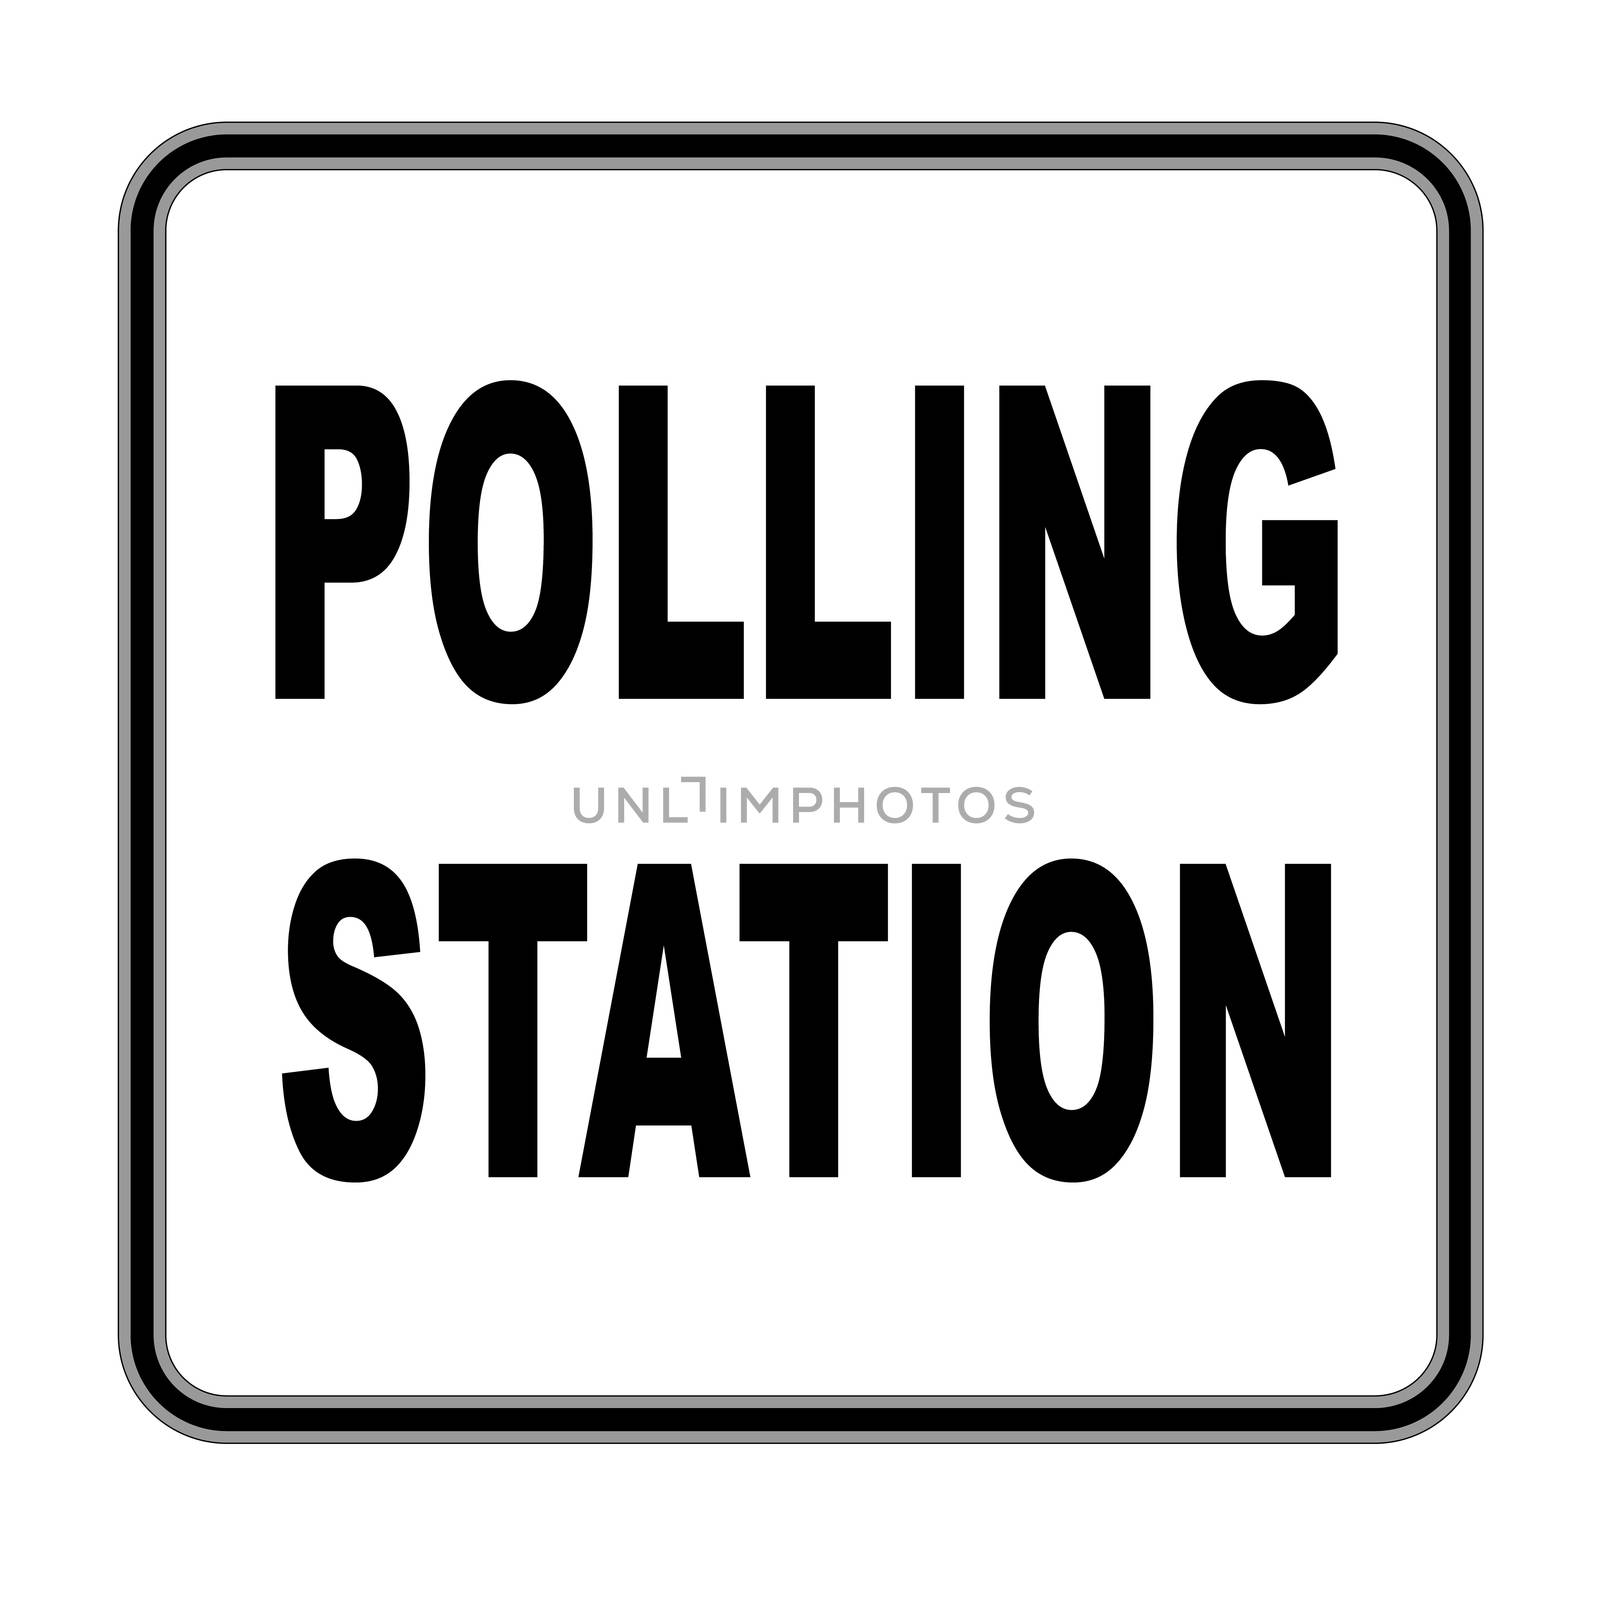 A polling station sign over a white background